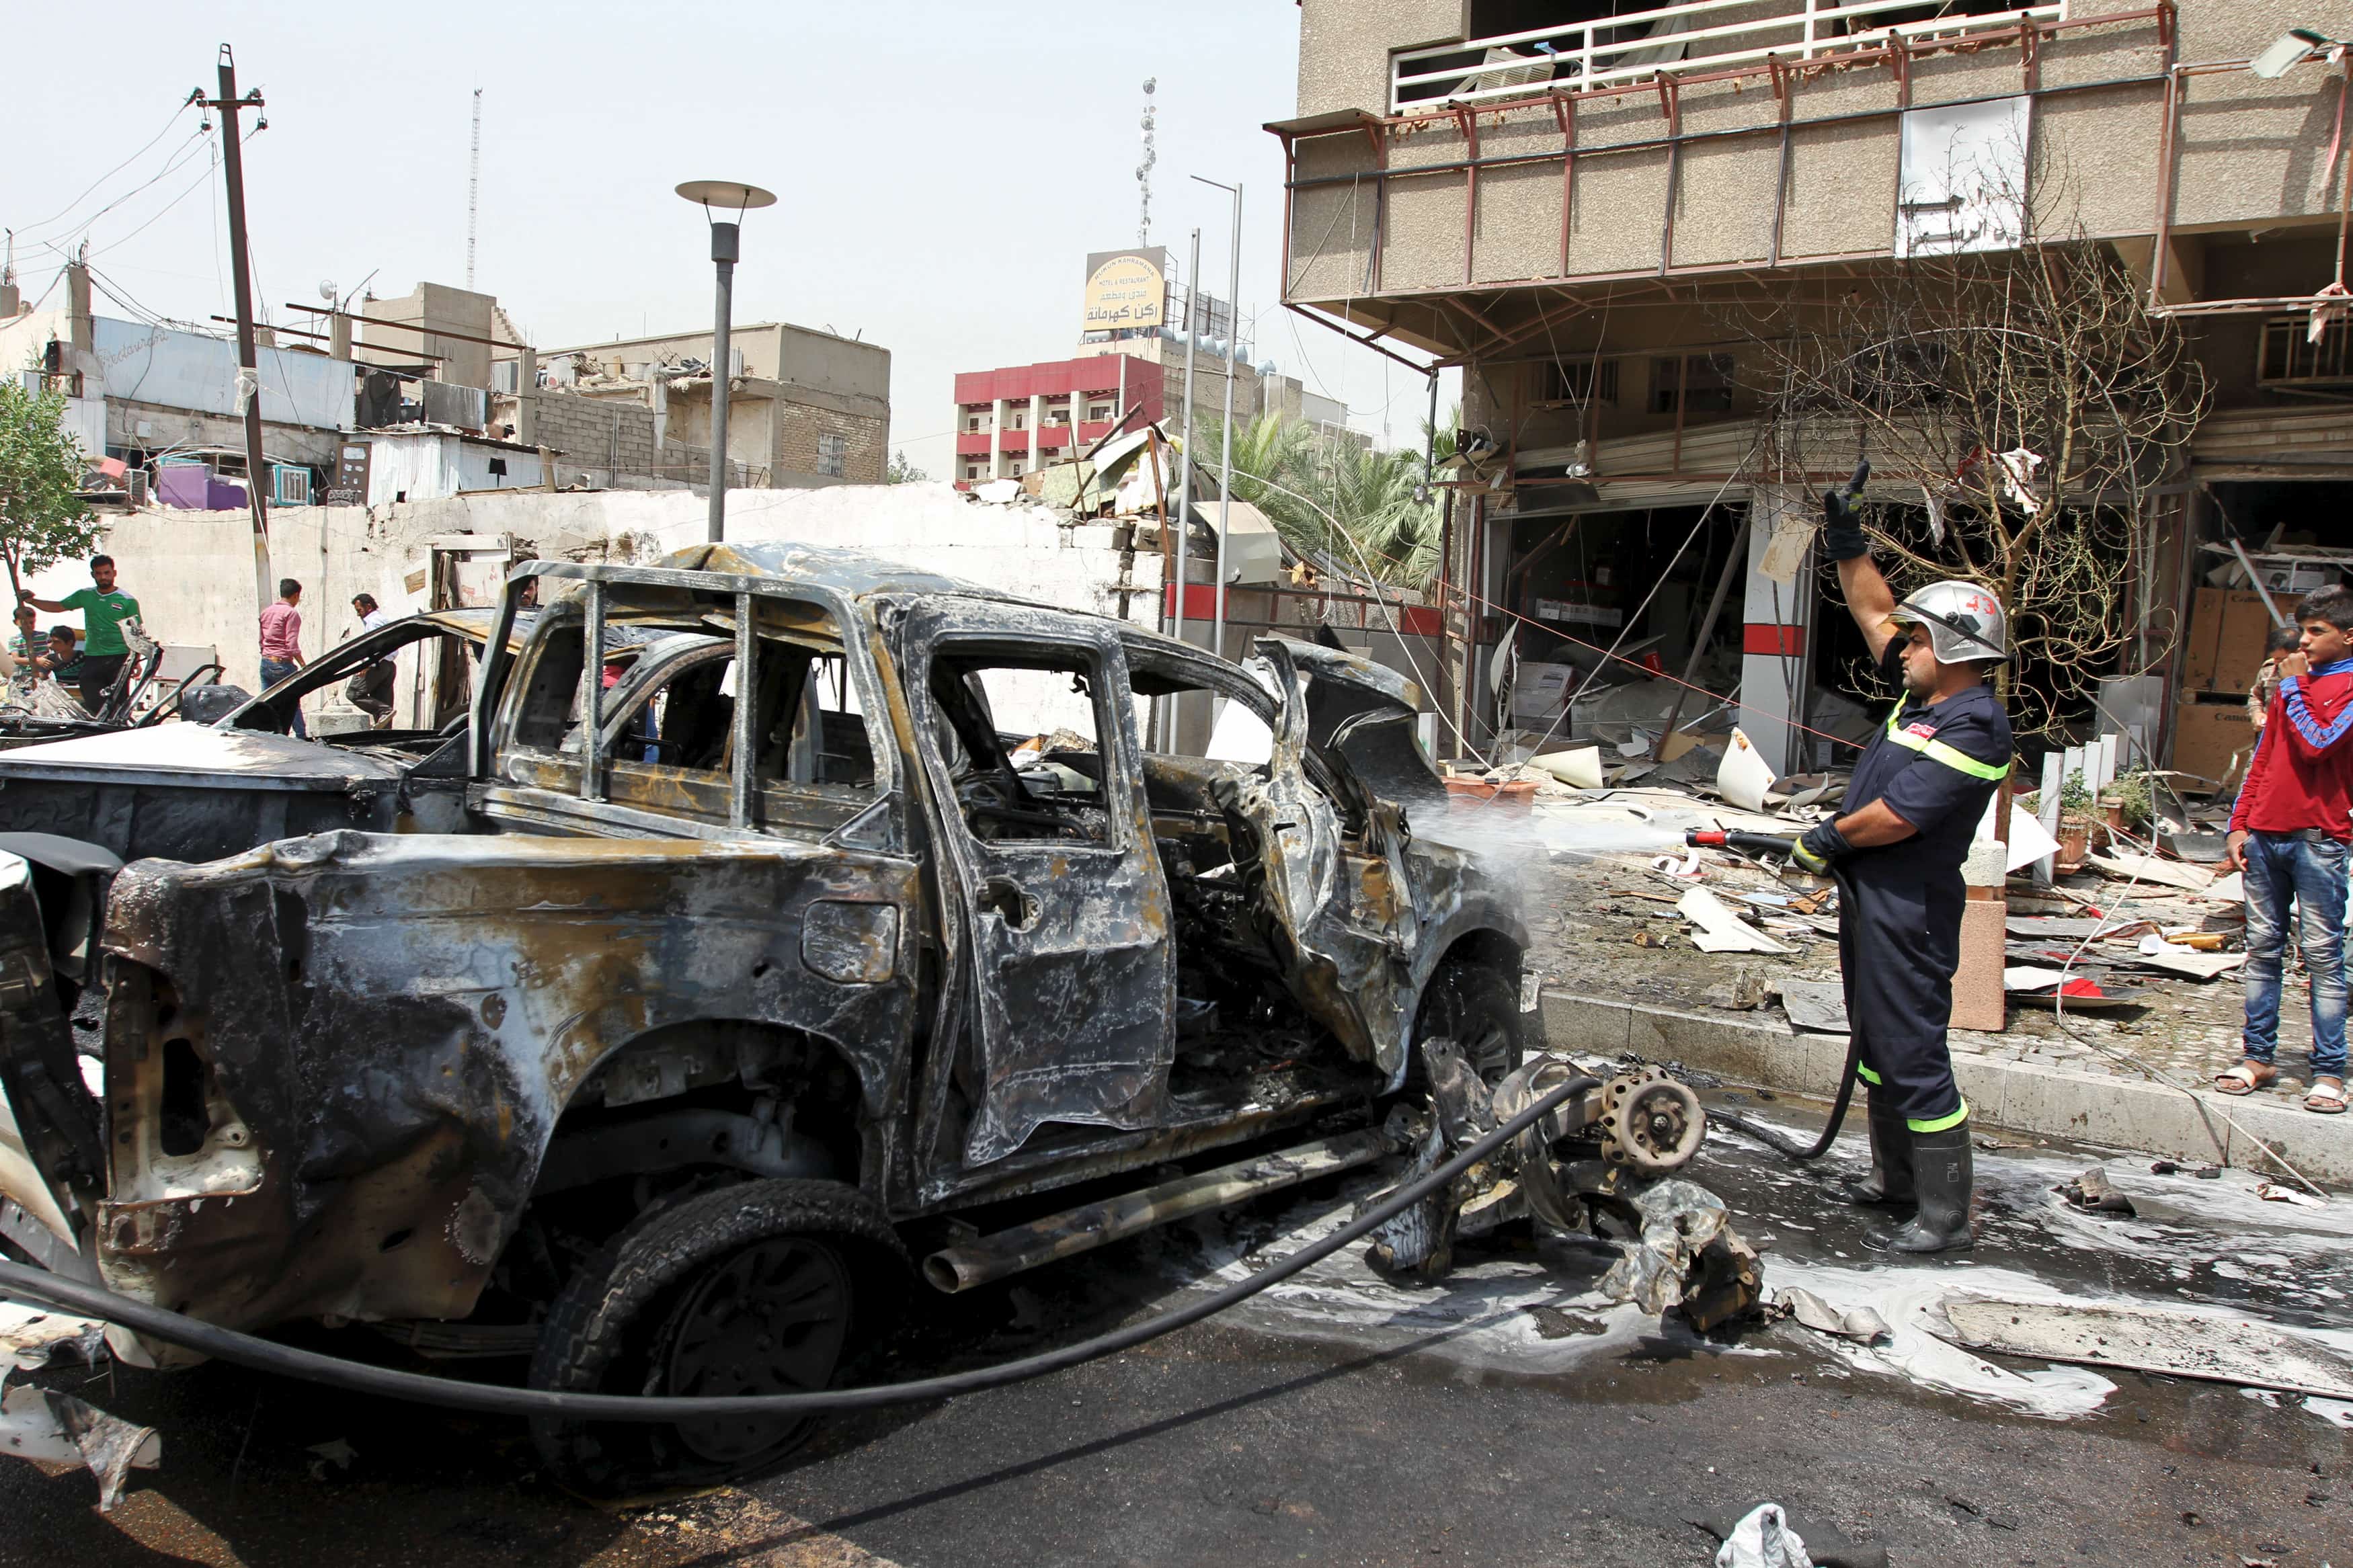 A fireman hoses down a burnt vehicle after a car bomb attack in Baghdad May 9, 2015., REUTERS/Stringer